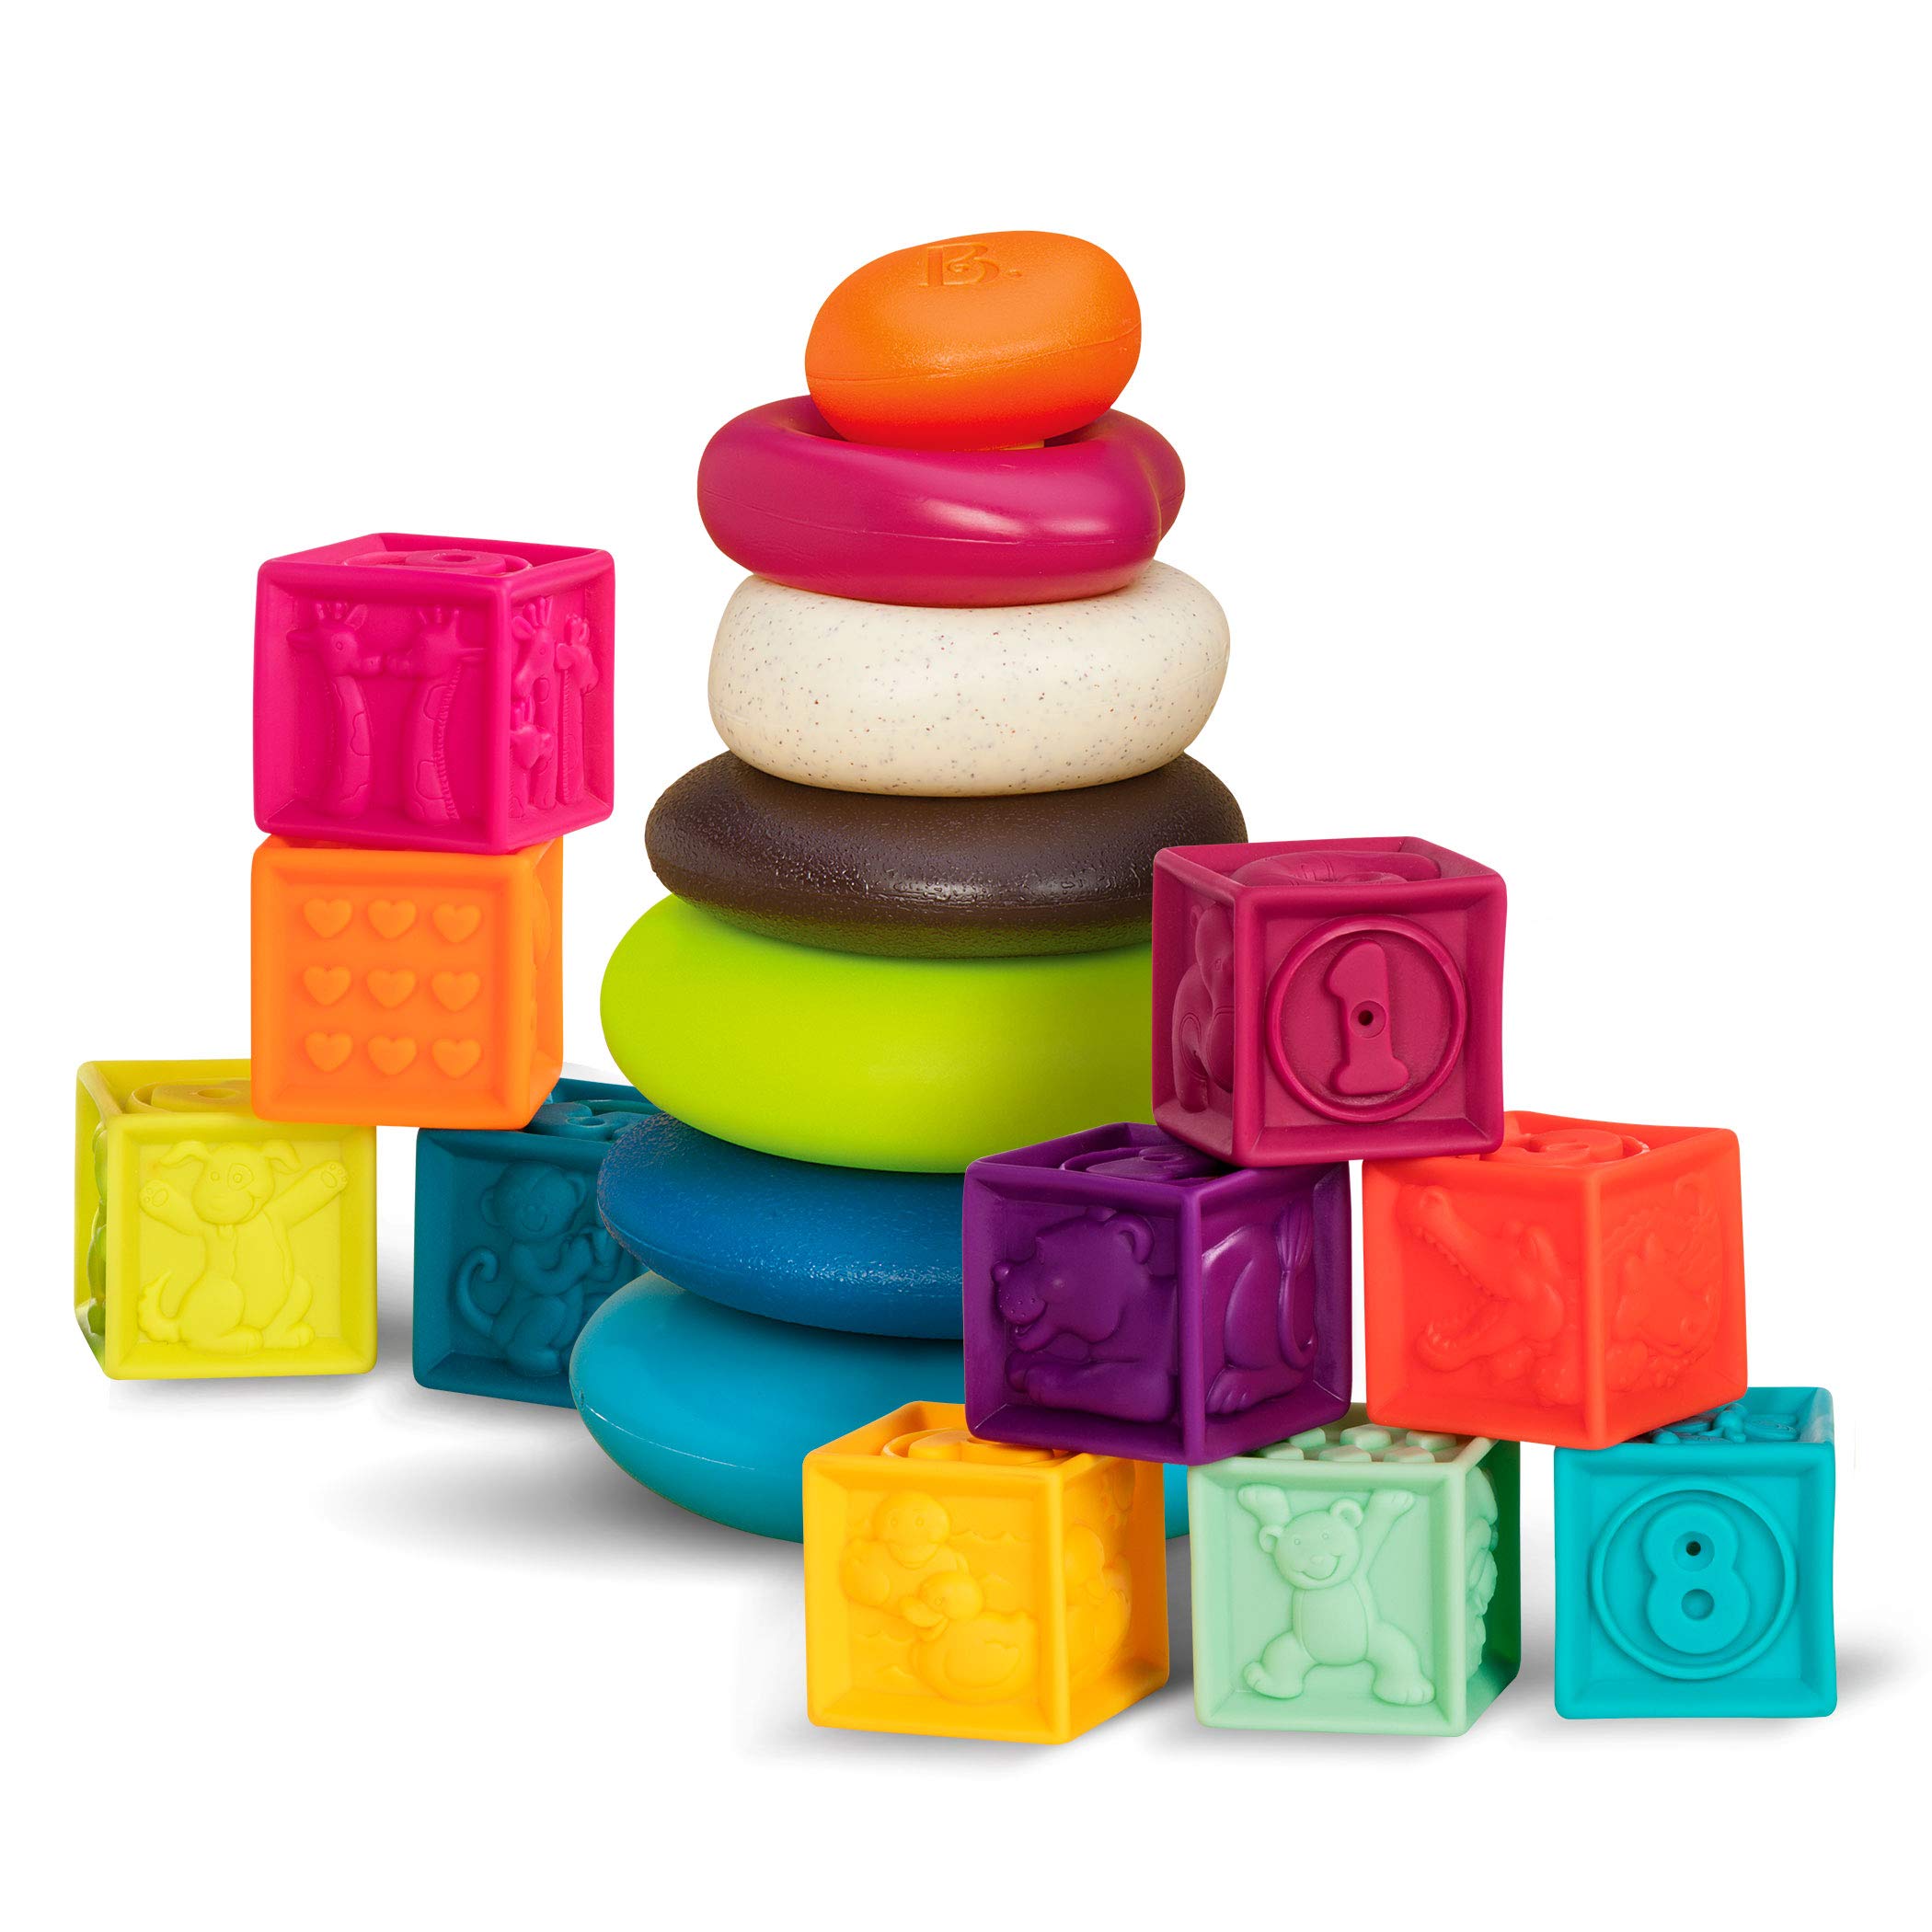 B. toys – Baby Blocks & Stacking – 10 Numbered Blocks & 5 Colorful Rings – Building Play Set for Infants – One Two Squeeze & Stacking Stones – Educational Toys – 6 Months + (BX1971Z)